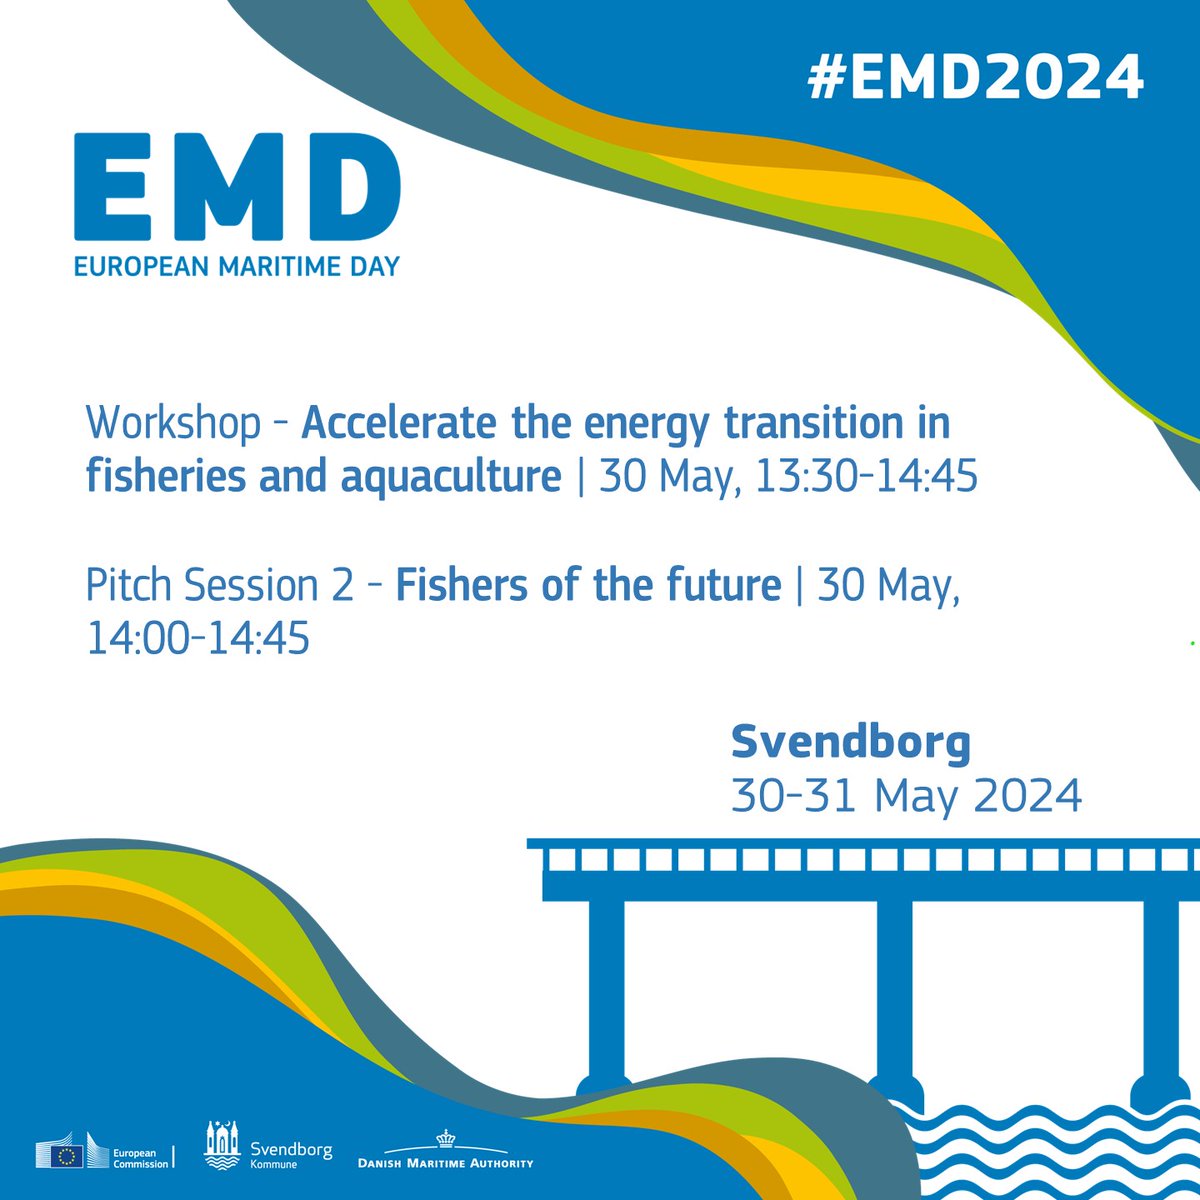 Do you work in the fisheries sector and are you attending #EMD2024? Don't miss the sessions on: ⚡️Accelerating the #EnergyTransition in fisheries and aquaculture 🐟#FishersOfTheFuture More info👇 europa.eu/!xv3Xqc #EU #EMFAF #MissionOcean #HorizonEU #Transport #Energy